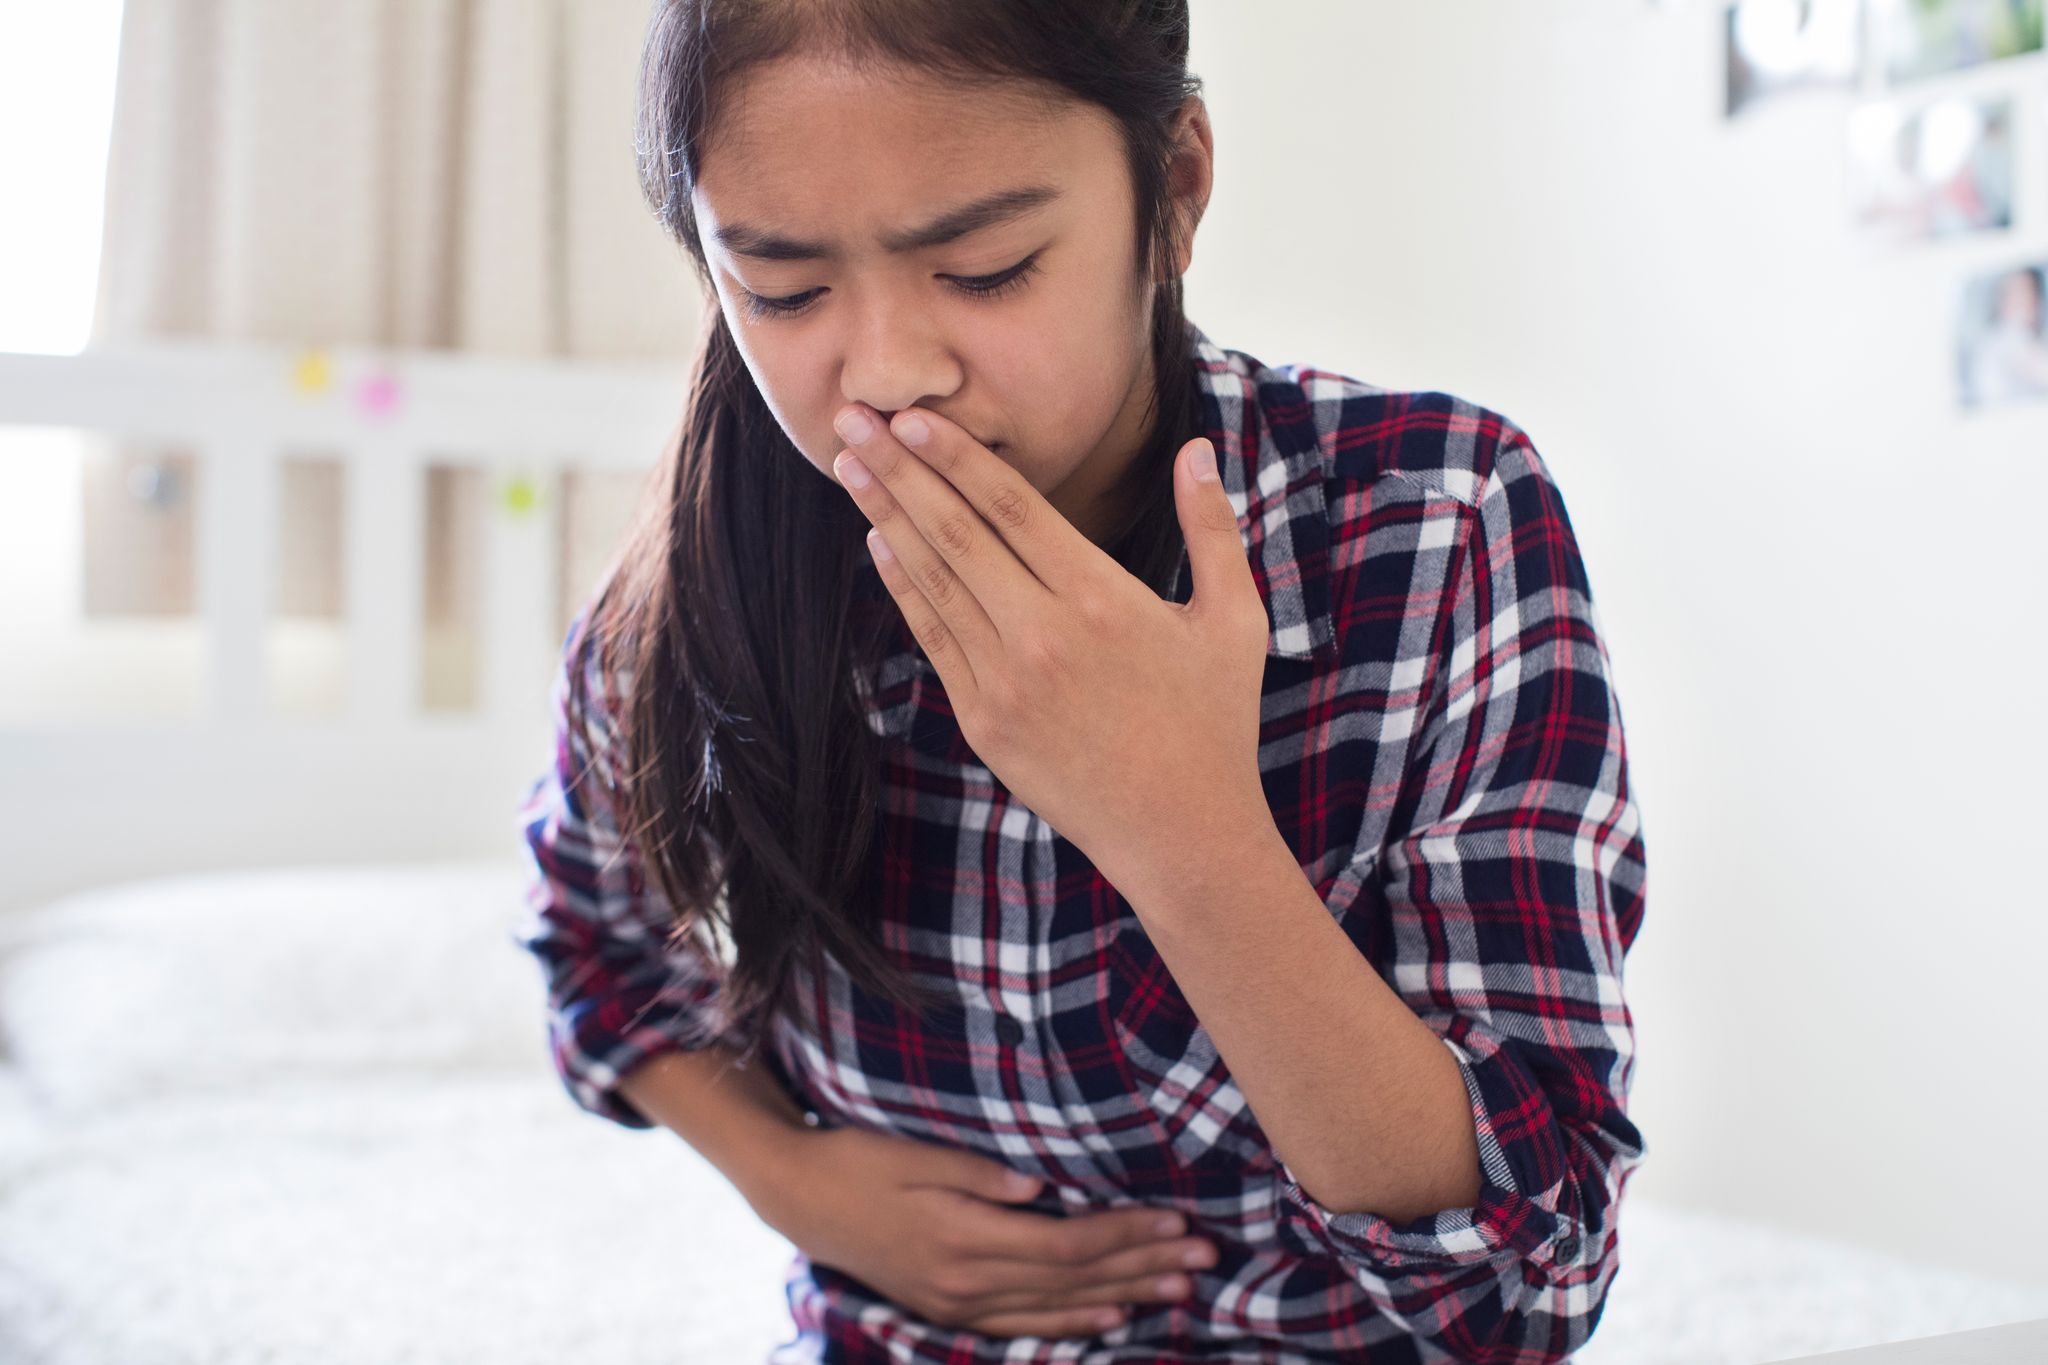 Treating surgical abdominal pain in children